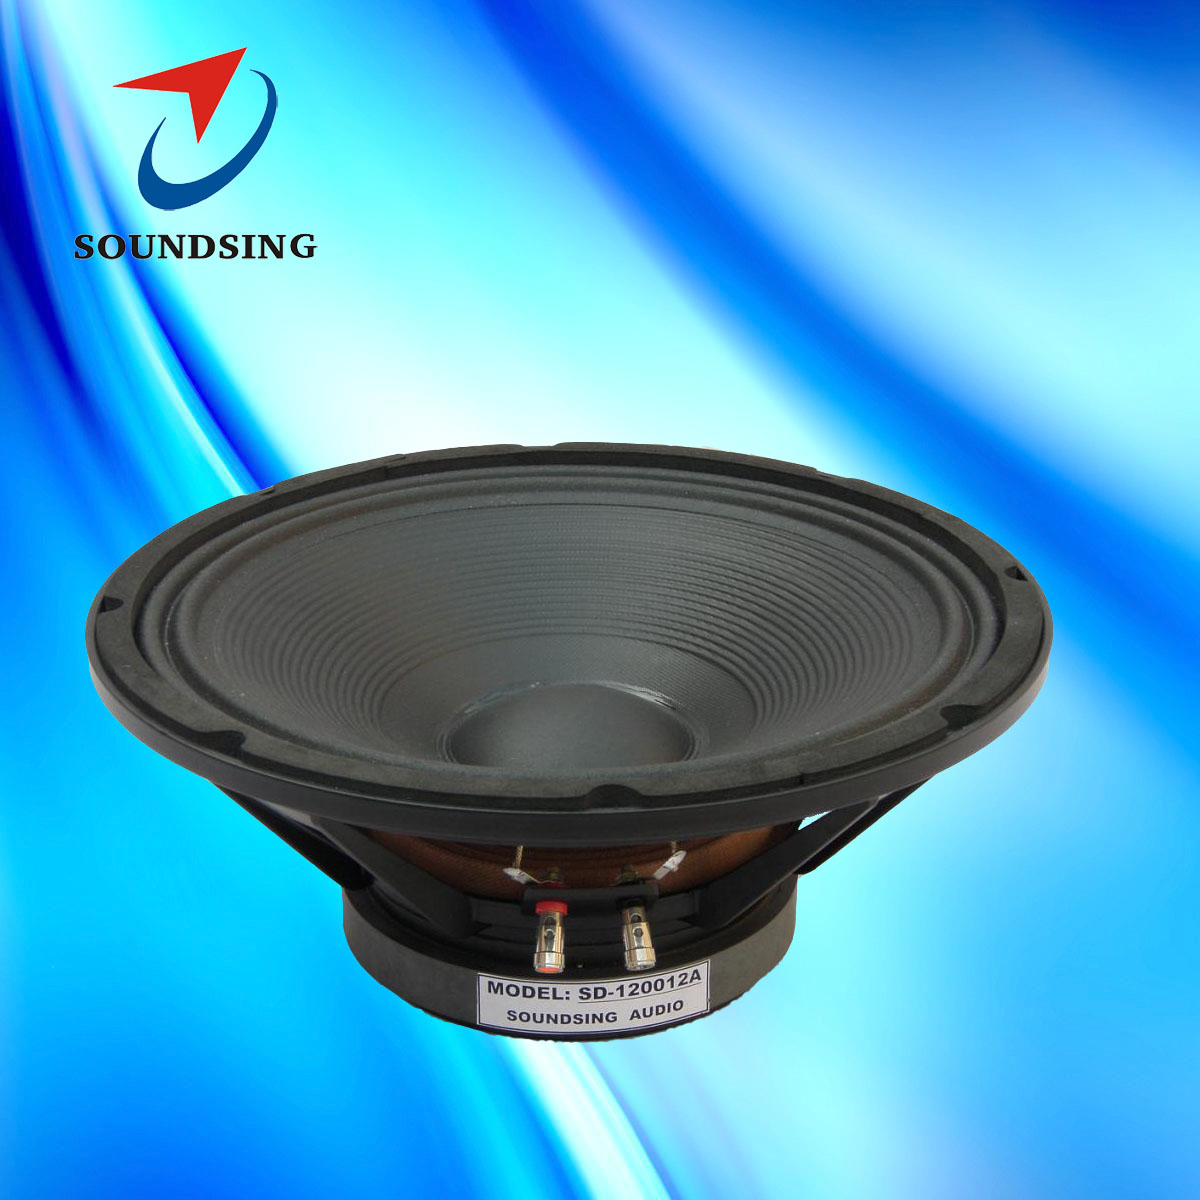 SD-120012A 12 inch live sound speakers